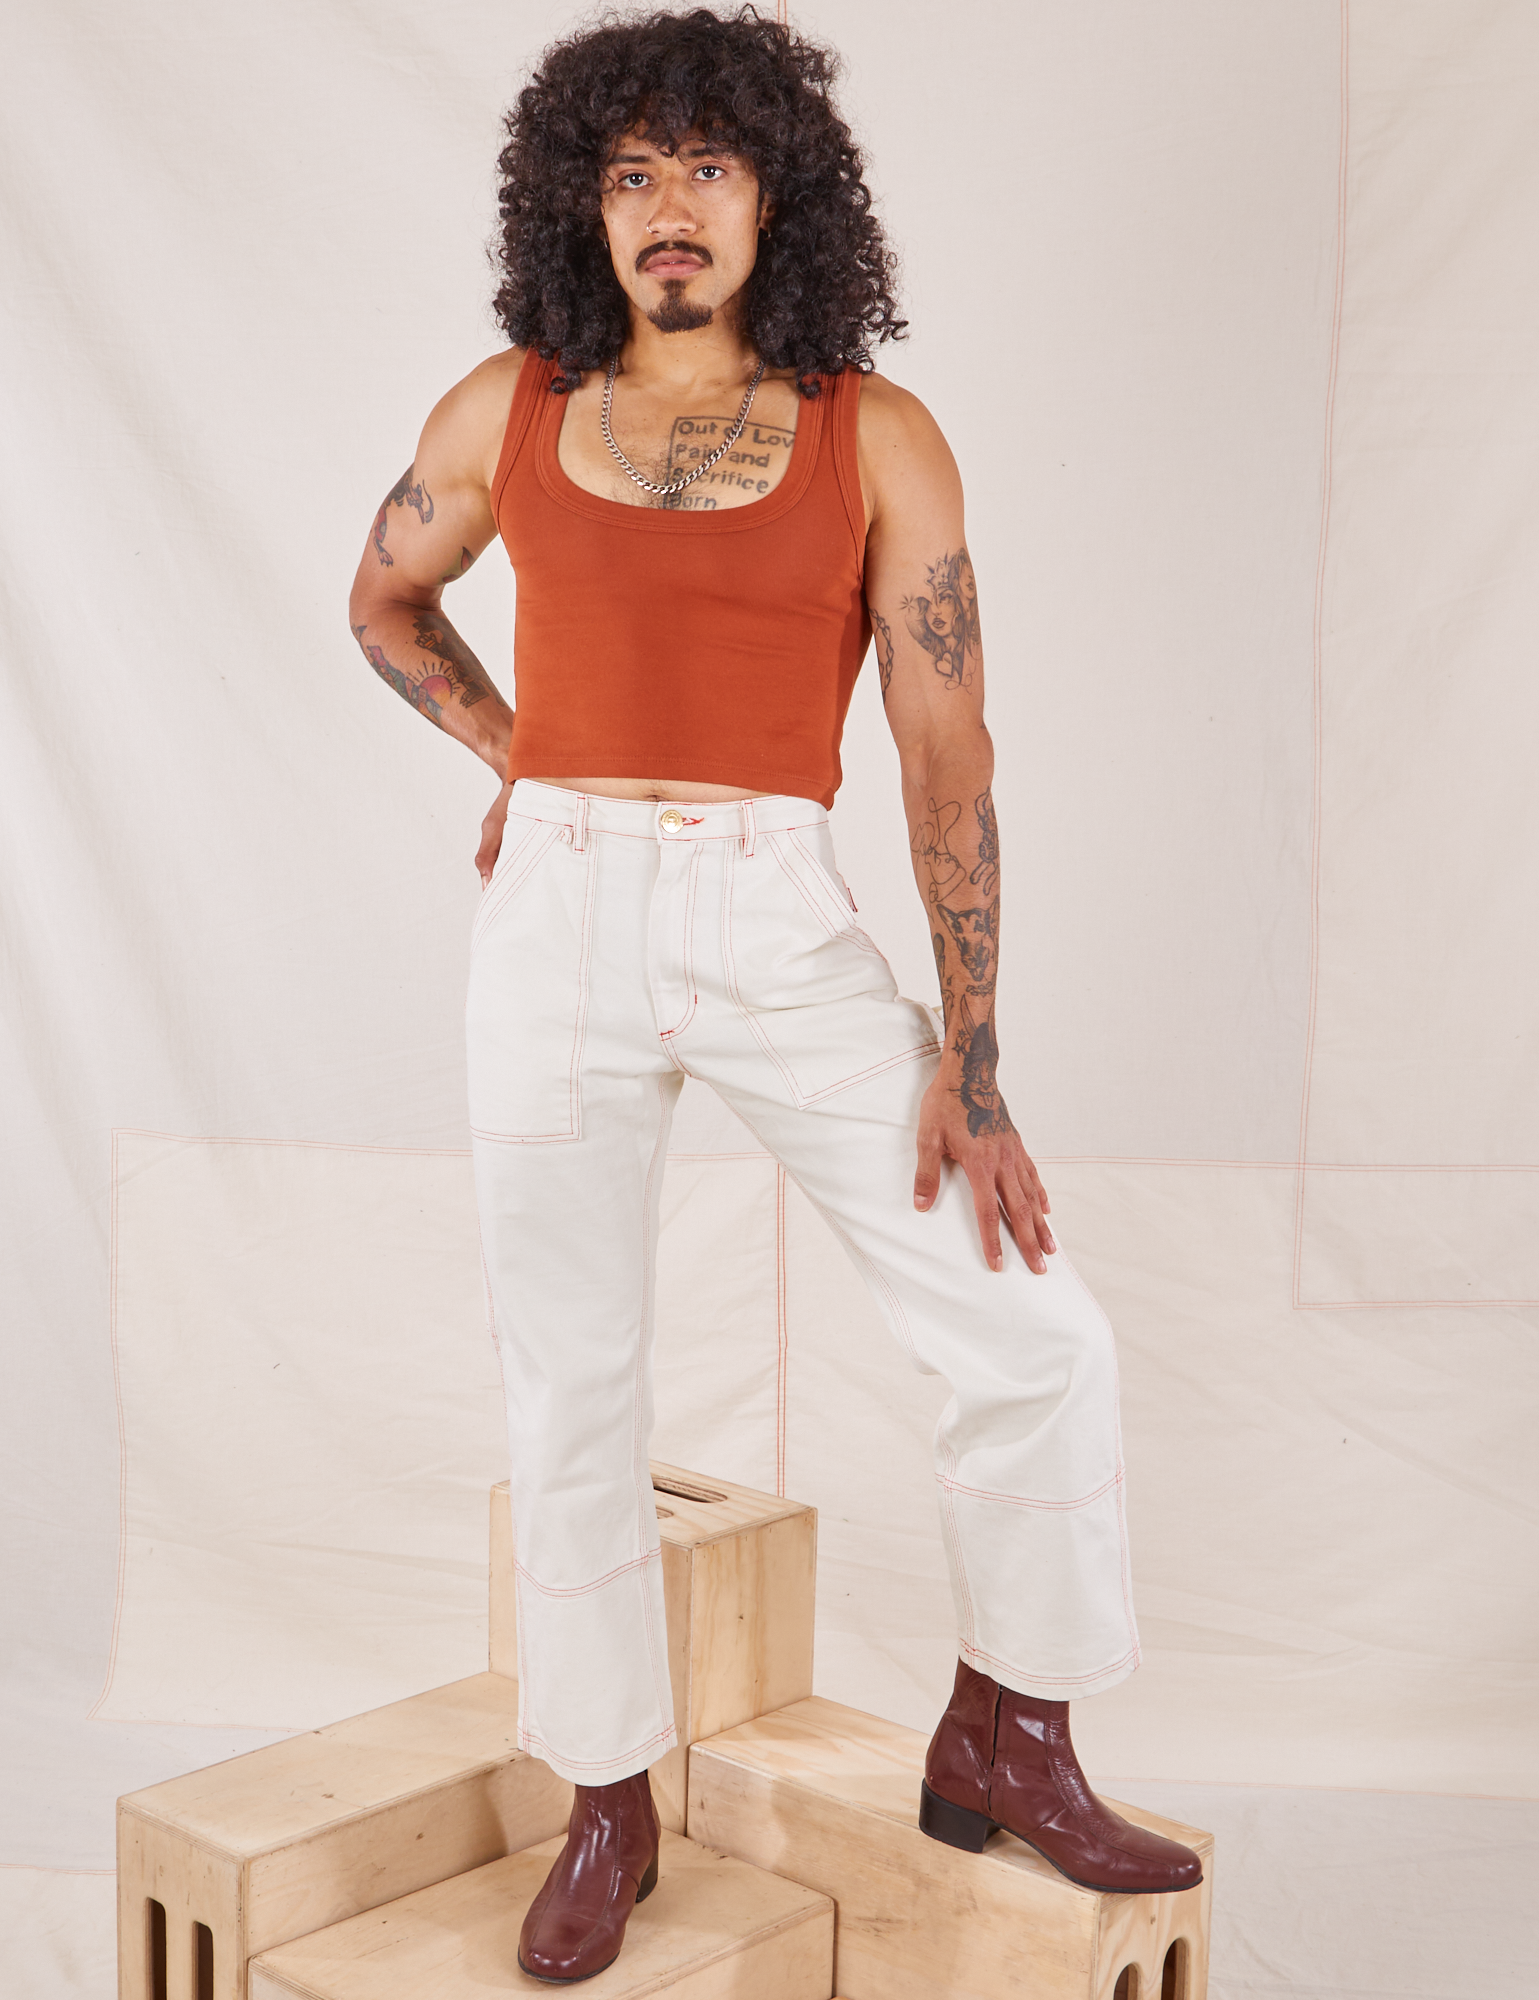 Jesse is 5&#39;8&quot; and wearing XS Carpenter Jeans in Vintage Off-White paired with burnt terracotta Cropped Tank Top